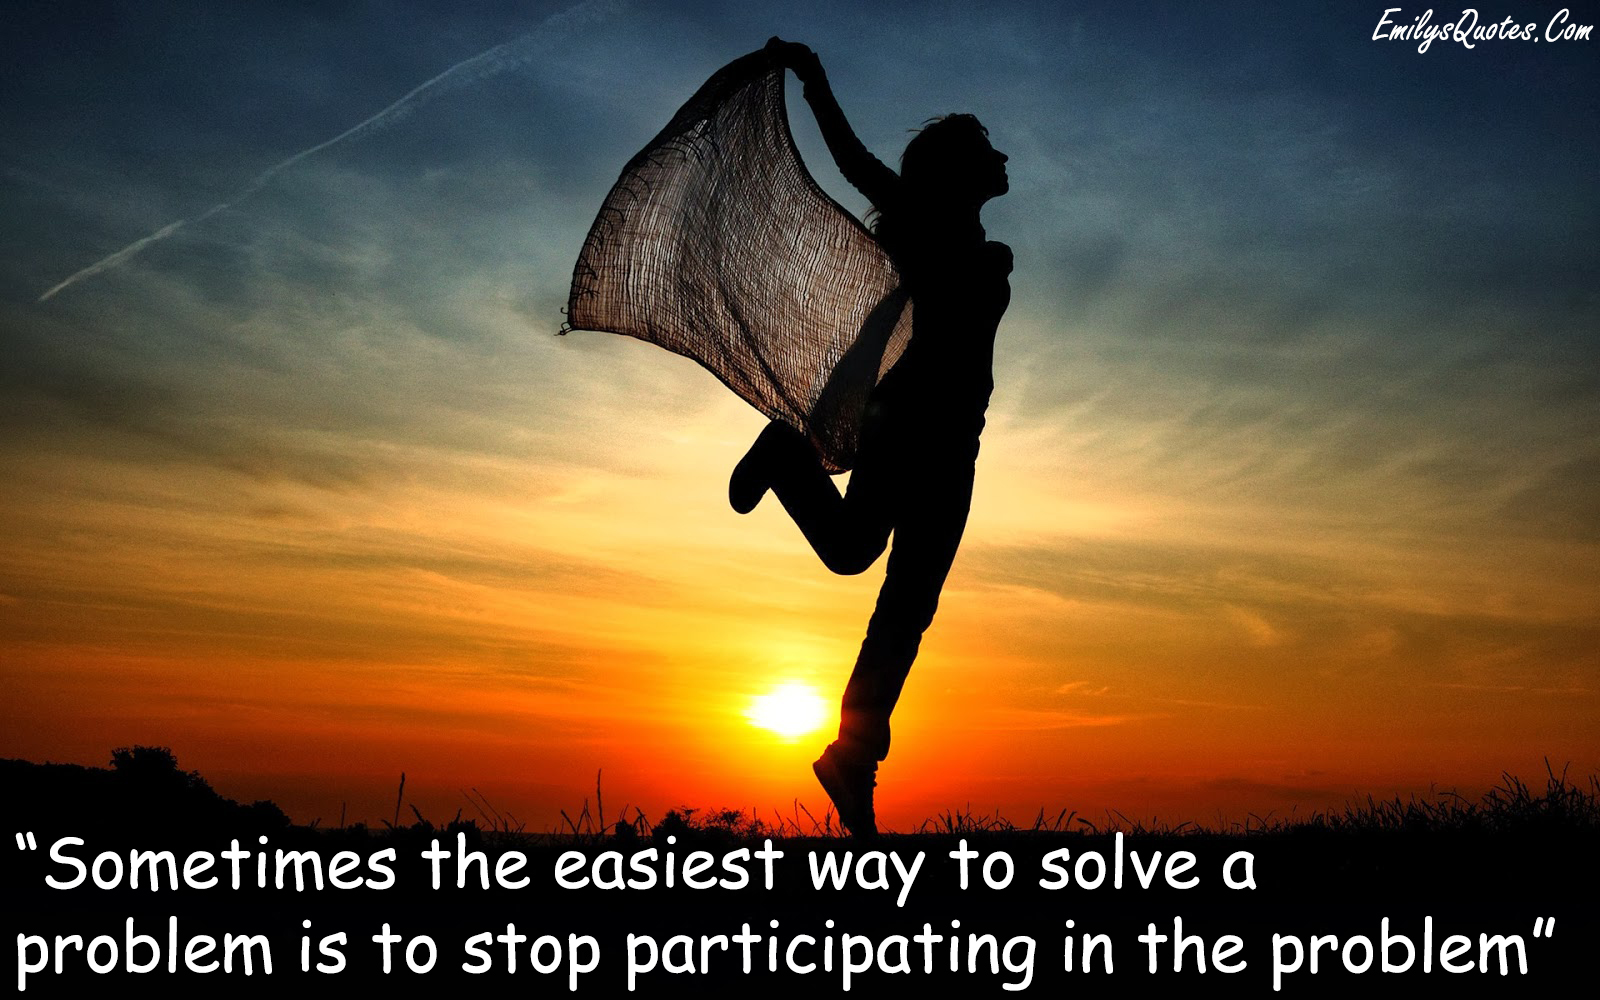 Sometimes the easiest way to solve a problem is to stop participating in the problem